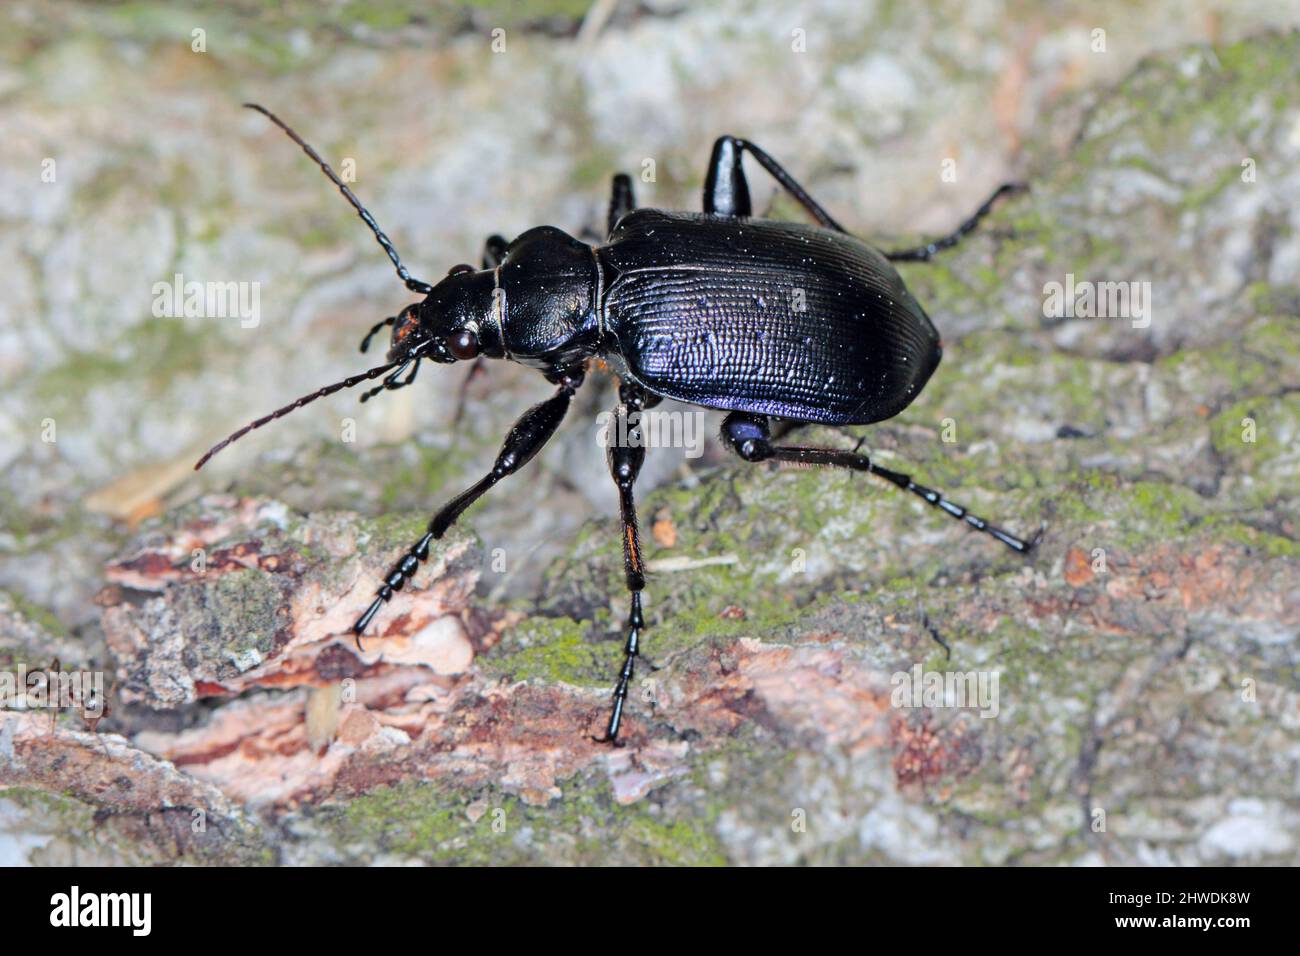 Beetle Calosoma inquisitor on the bark of a tree. It is a predatory beetle that eats pests in forests and parks. Stock Photo